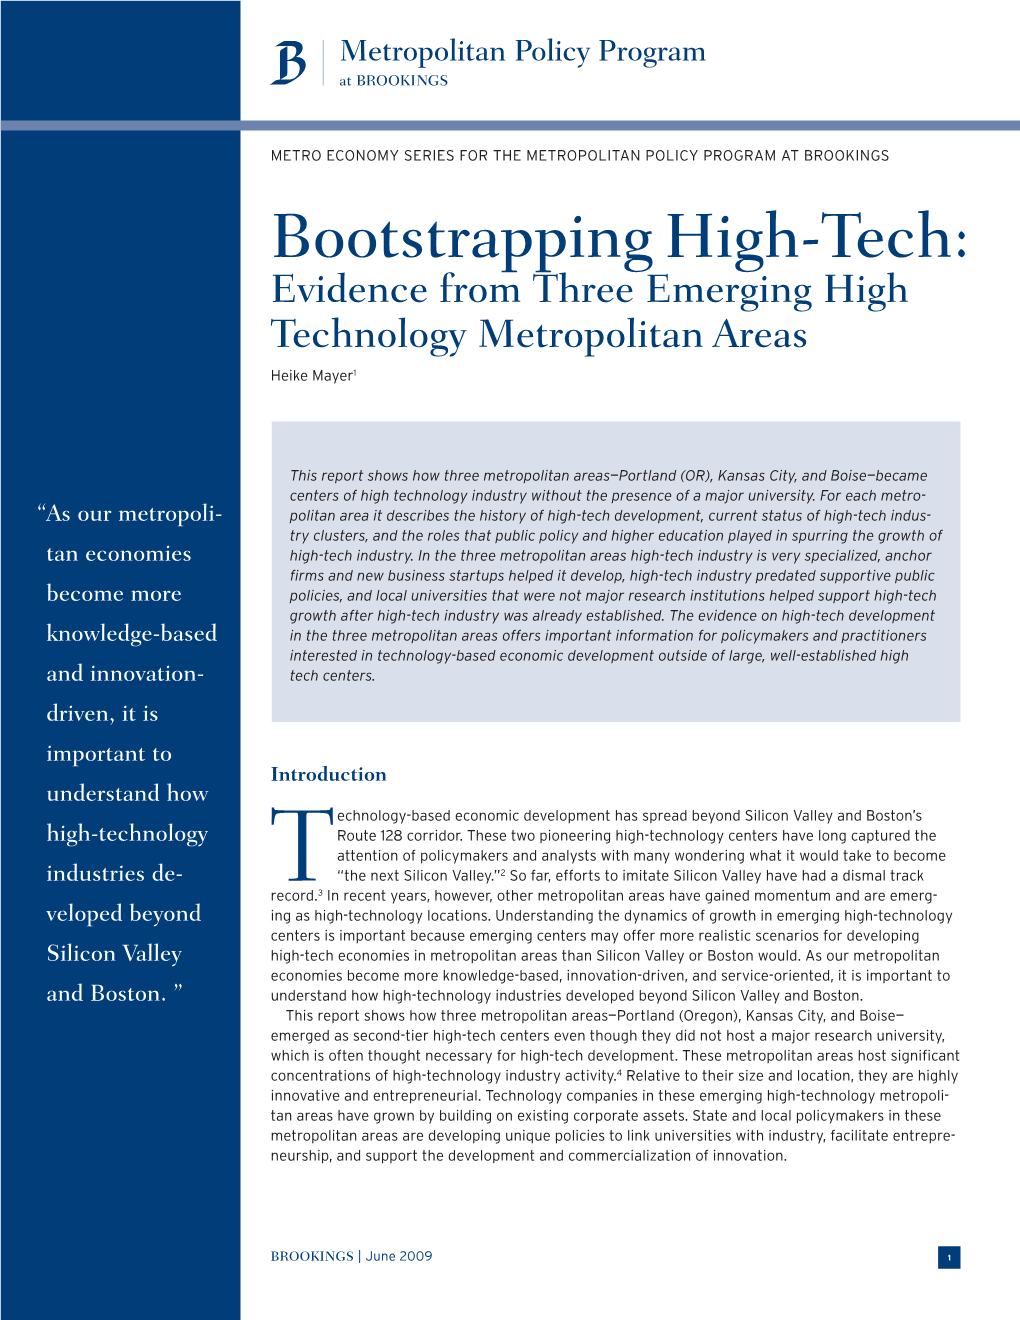 Bootstrapping High-Tech: Evidence from Three Emerging High Technology Metropolitan Areas Heike Mayer1